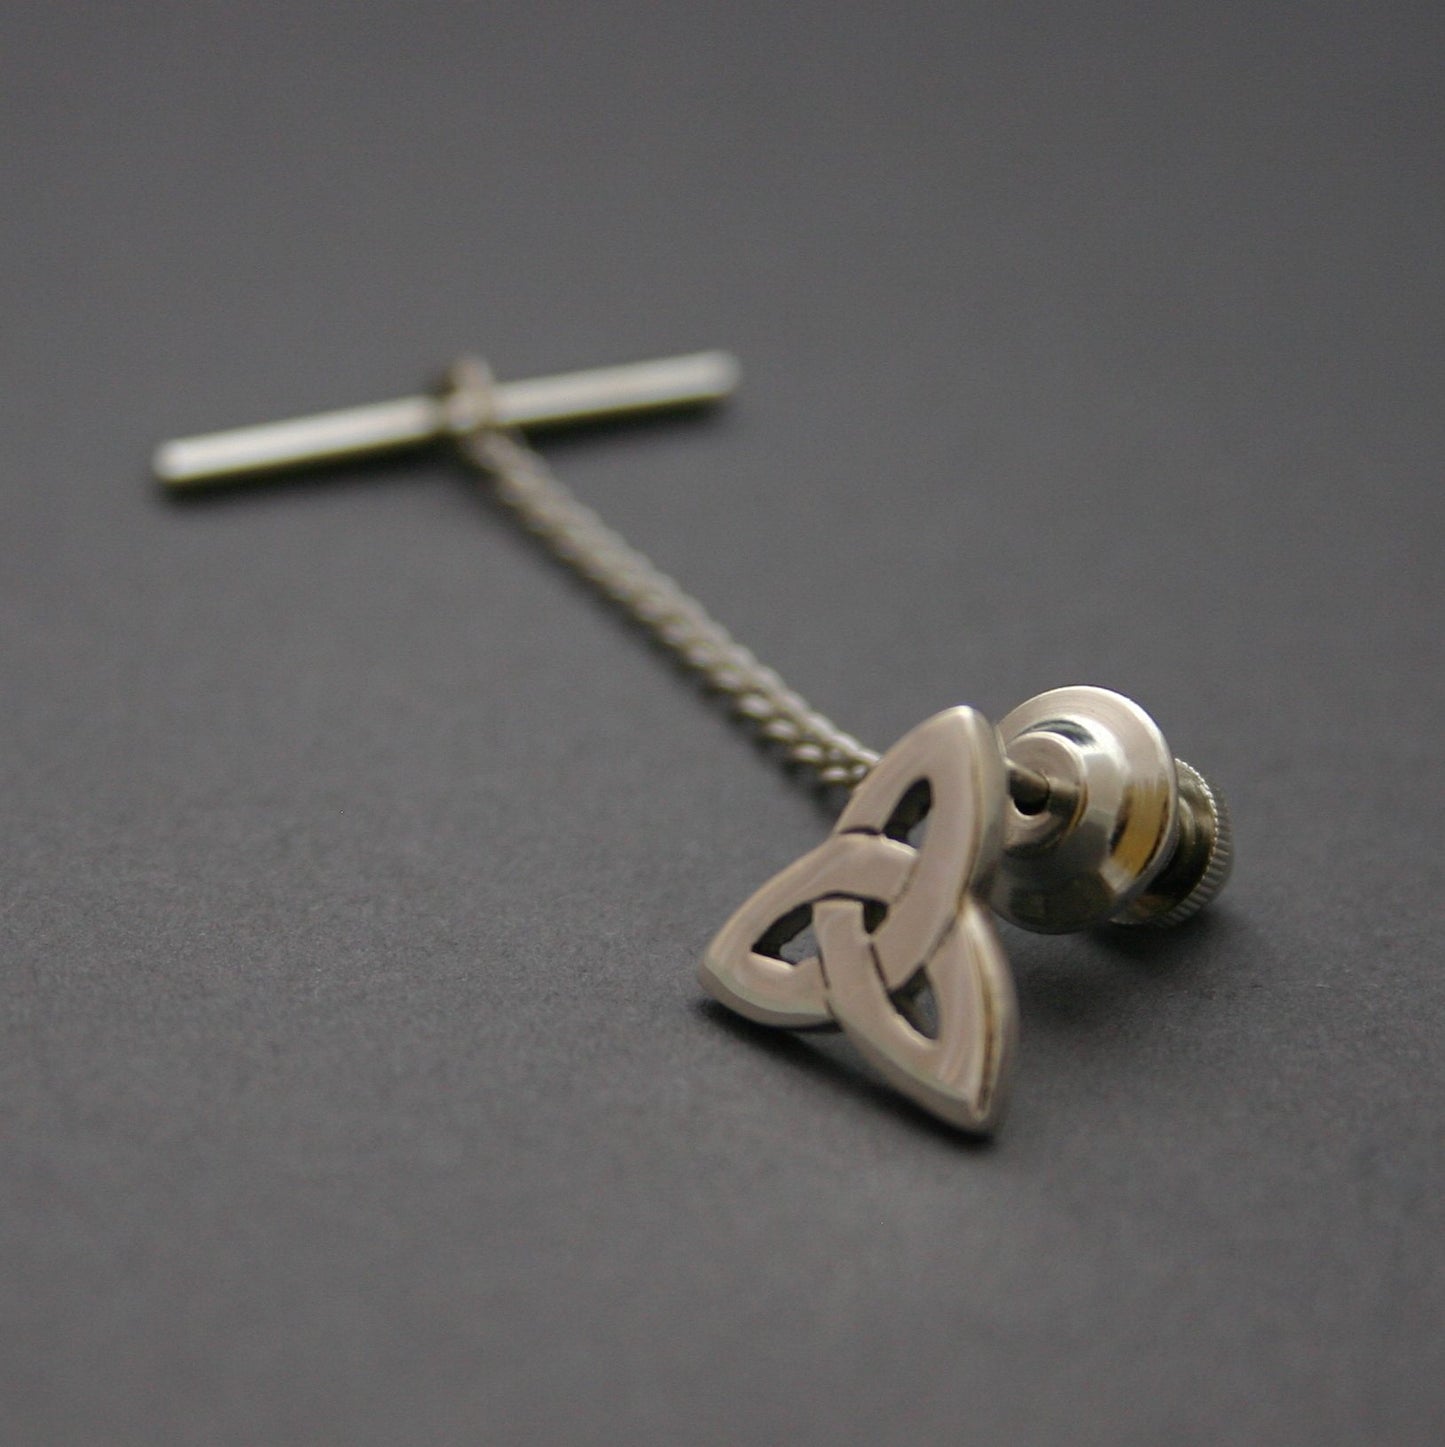 Silver trinity knot tie pin chain and bar